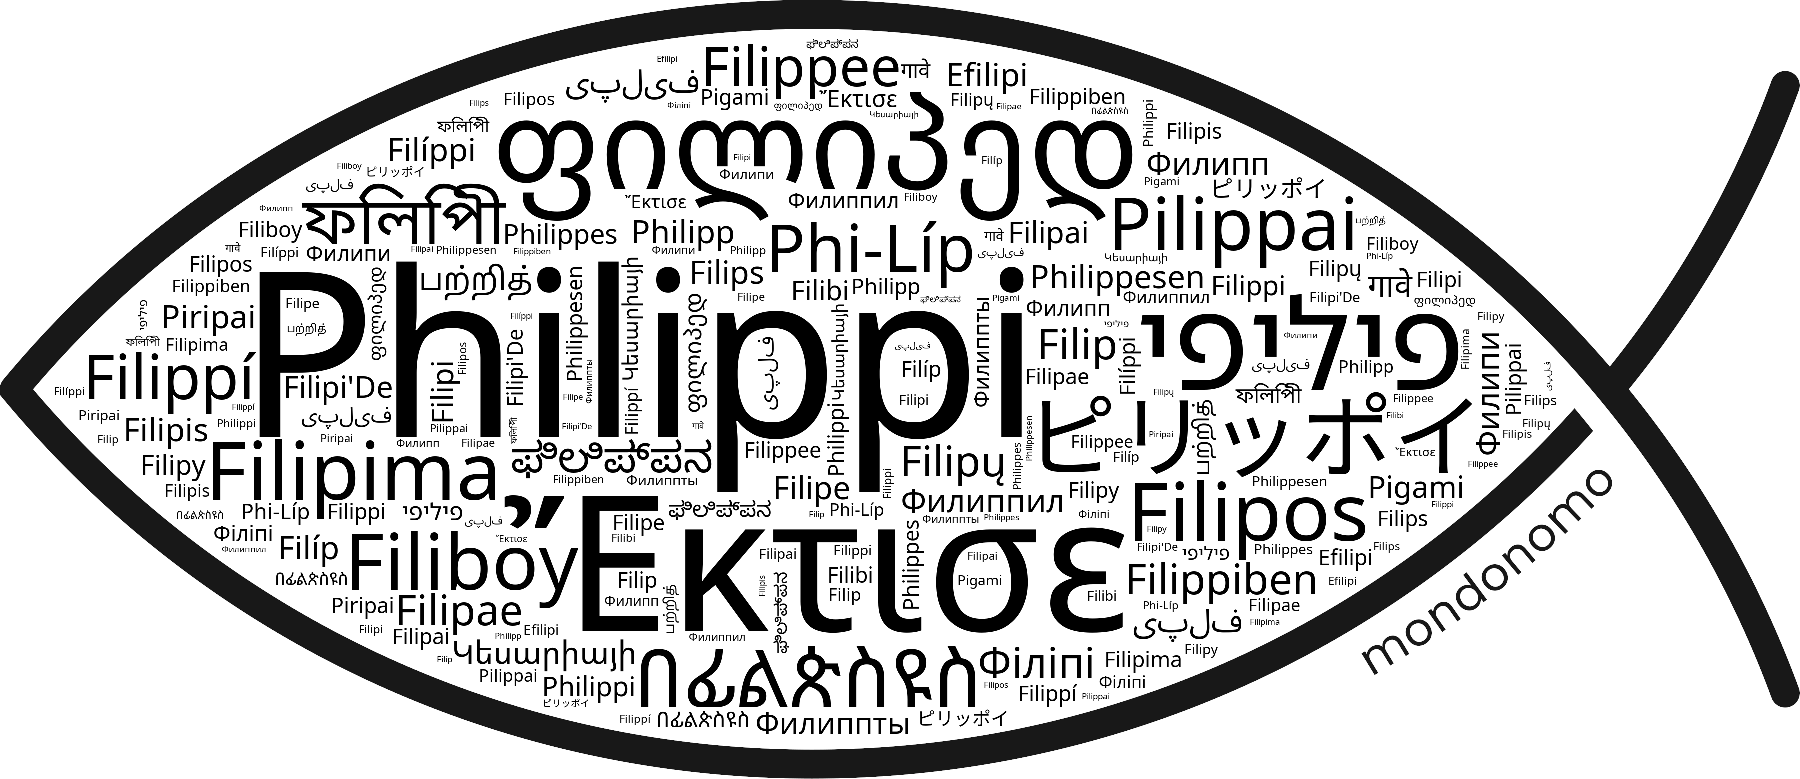 Name Philippi in the world's Bibles